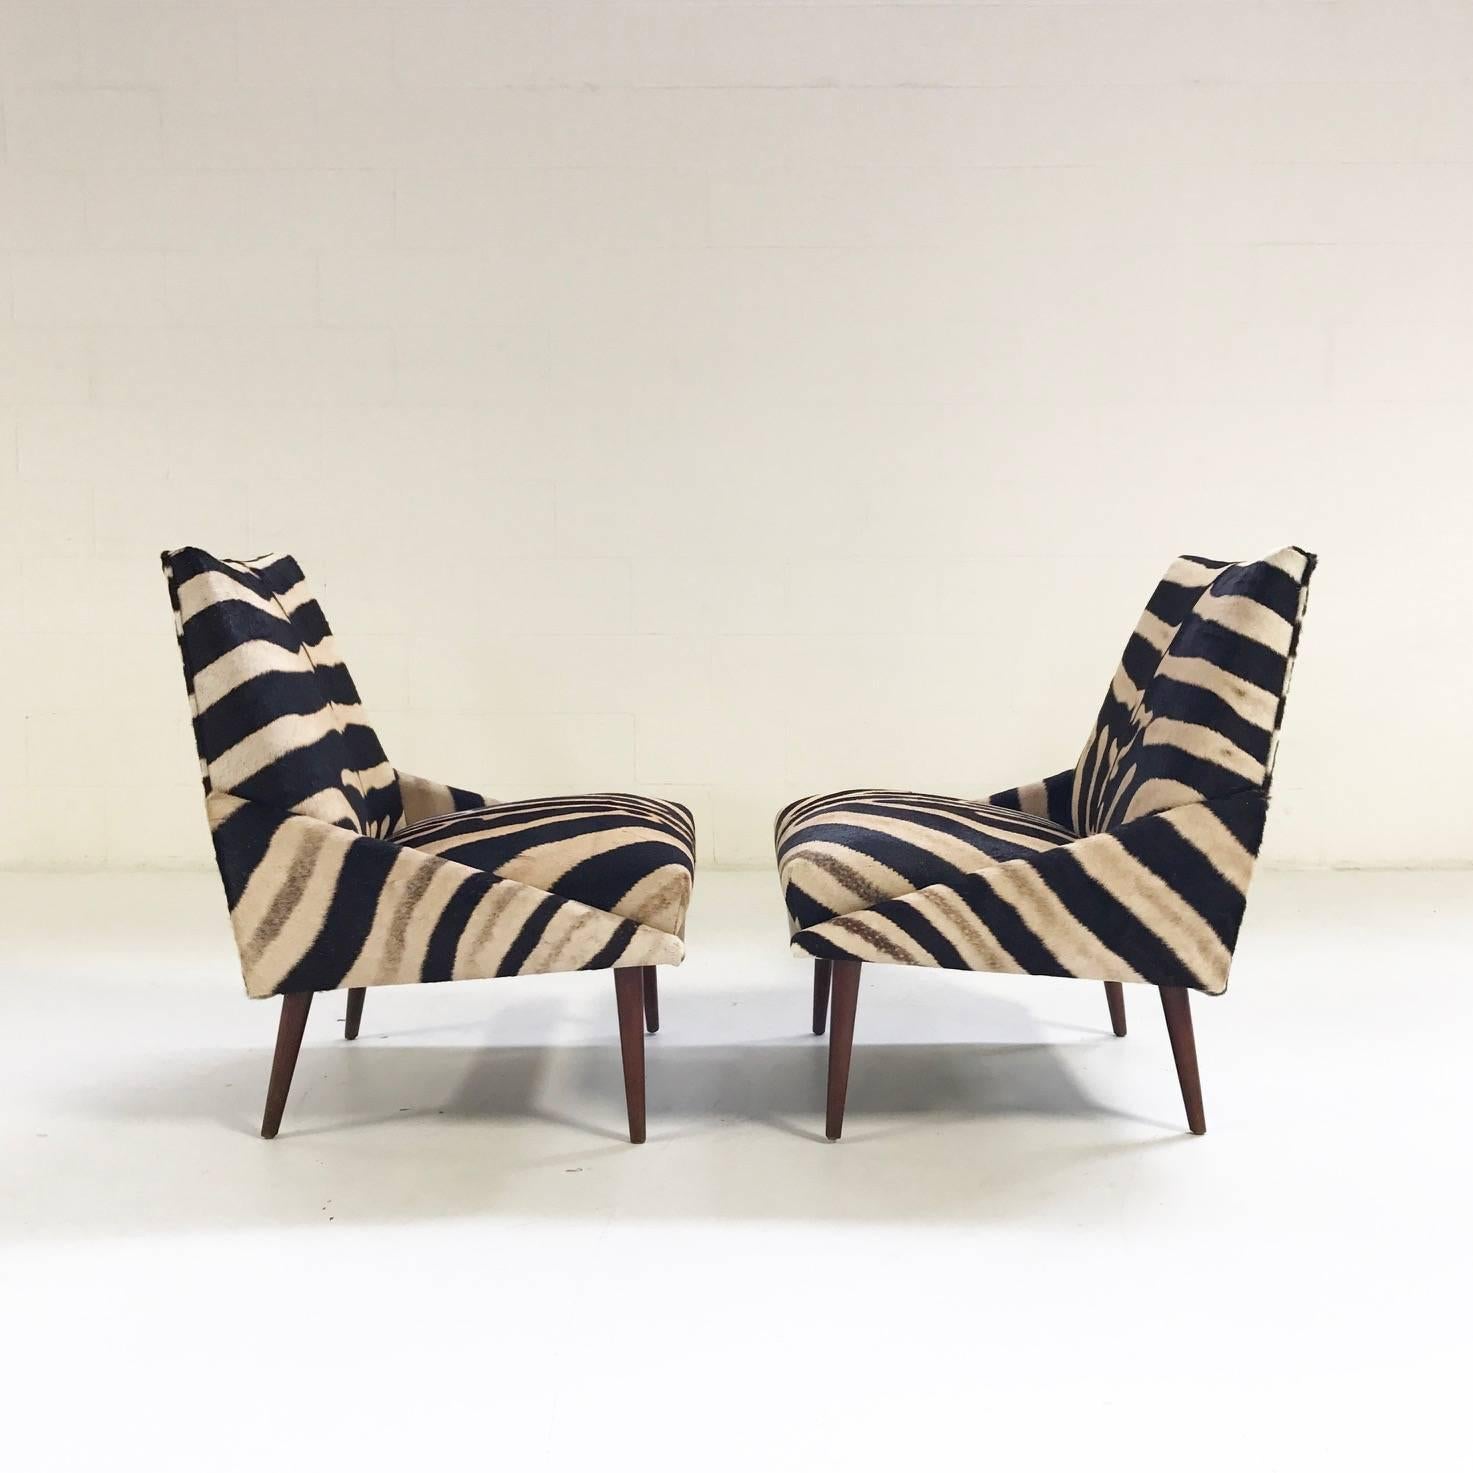 This stellar pair of chairs were designed in the manner of renowned Mid-Century Modern designer, Adrian Pearsall. They underwent a reconditioning and restoring process for which Forsyth is known the world over. Reupholstering in our one of a kind